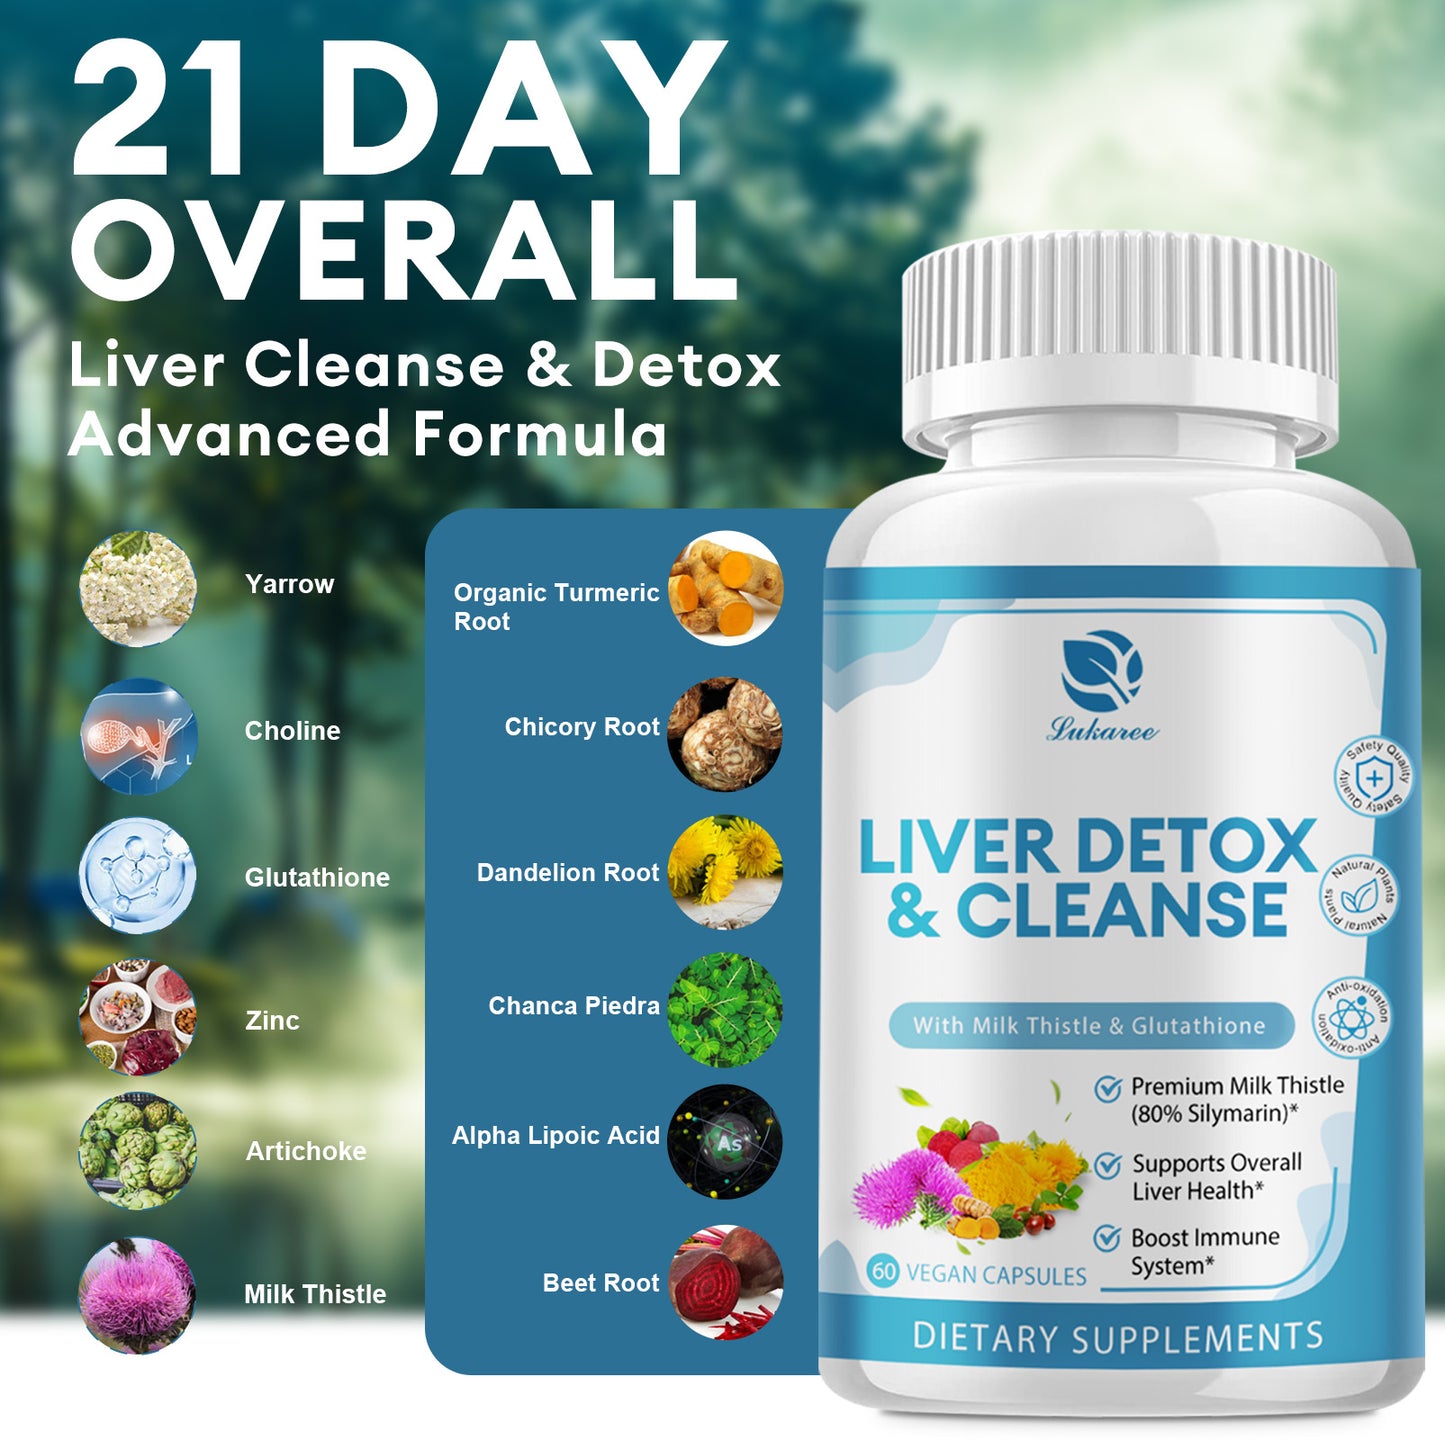 (2 Pack) Liver Cleanse Detox & Repair Formula - with Milk Thistle 1000mg, Glutathione, Dandelion Root & Artichoke Extract for Milk Thistle Liver Detox- Antioxidant & Immune Support - 120 Capsules